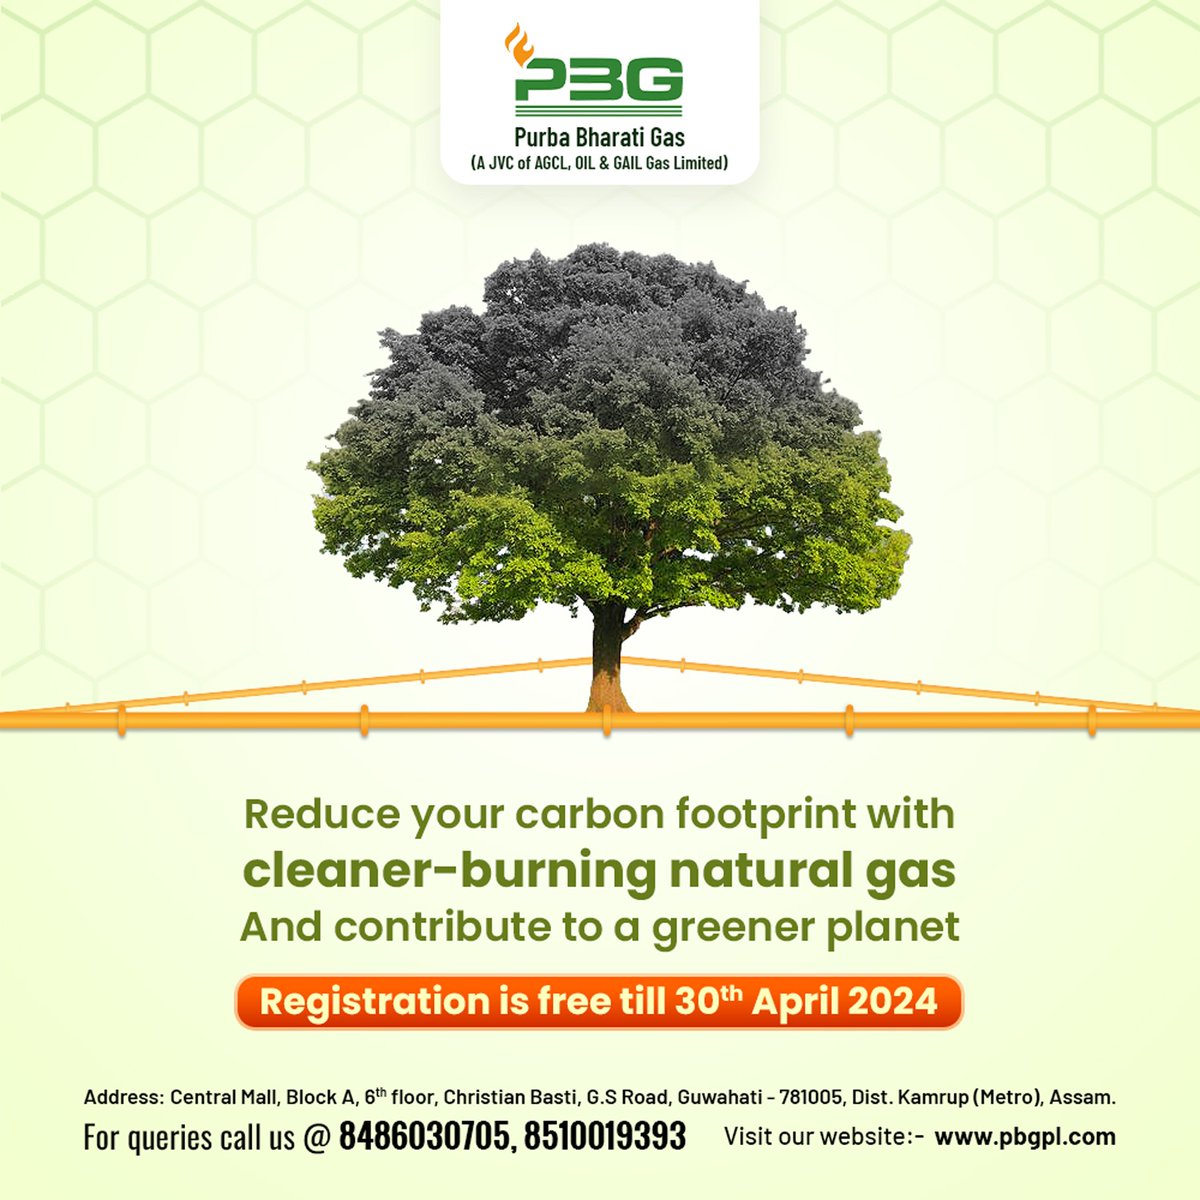 Are you ready to contribute to a greener planet? Hurry, register today.
.
.
#pbgpl #greenenergy #FREEREGISTRATION